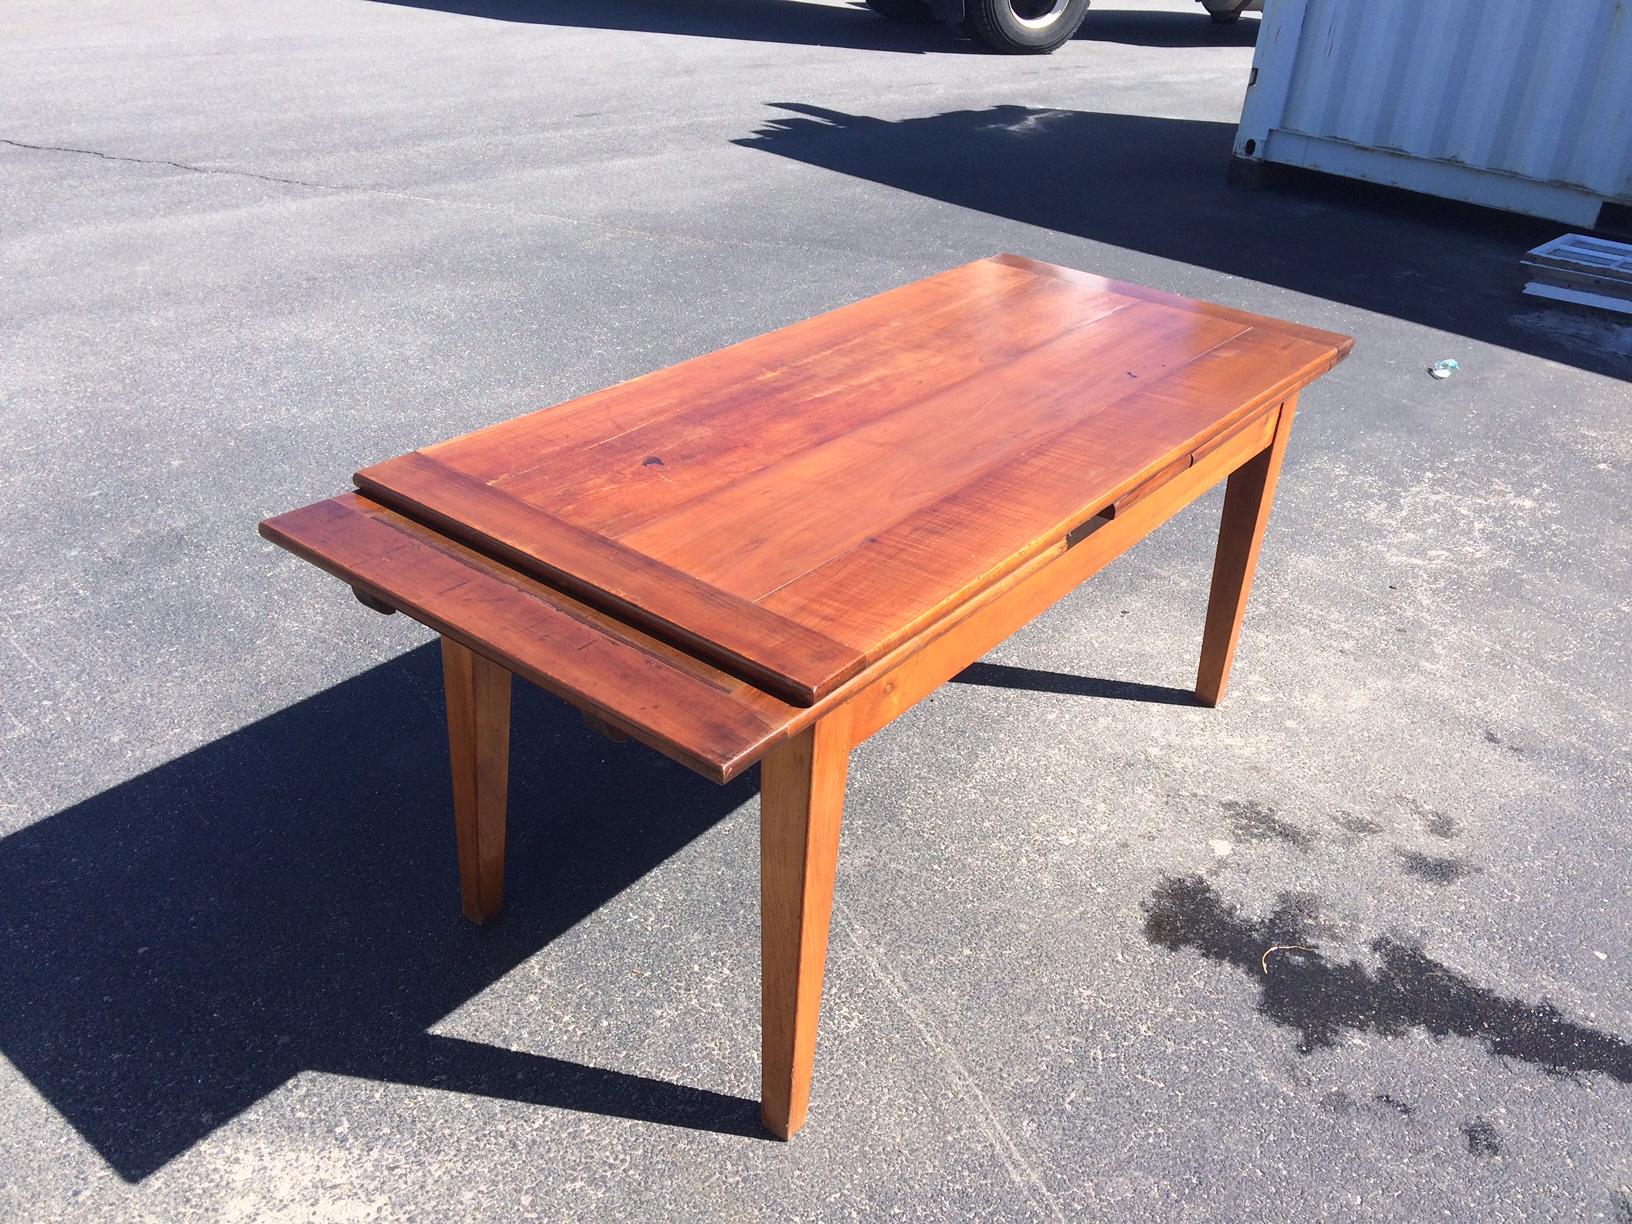 Beautiful vintage fiery red cherry wood European Draw Leaf Table with a four board top and breadboard ends, straight skirt and tapered legs. This pieces gives off a nice shine and is in excellent condition, structurally sound, and ready for a new